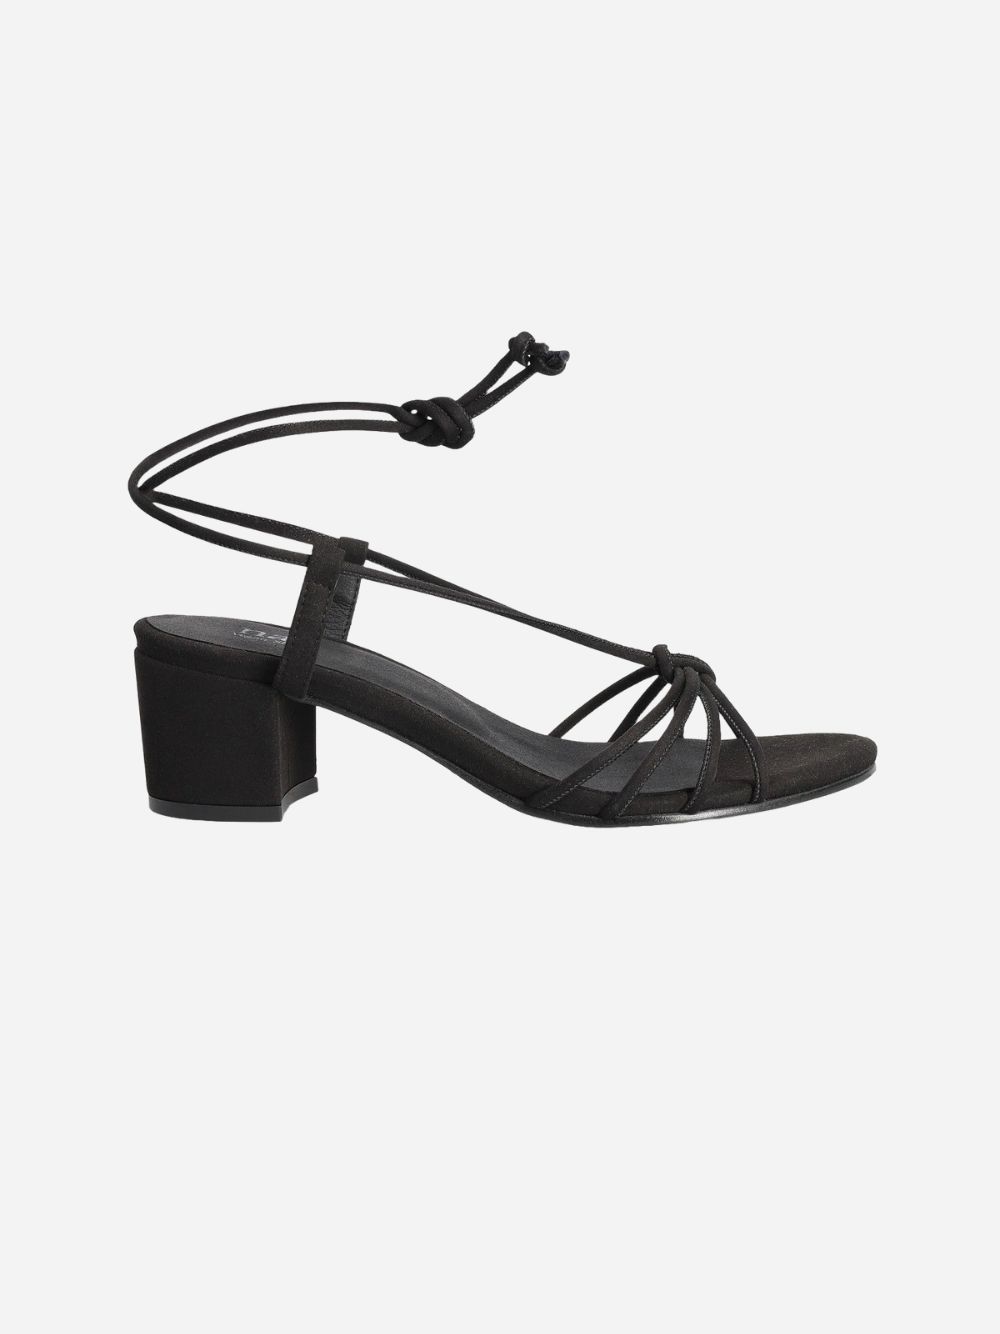 Holly Black Vegan Heeled Sandals with Ankle Straps